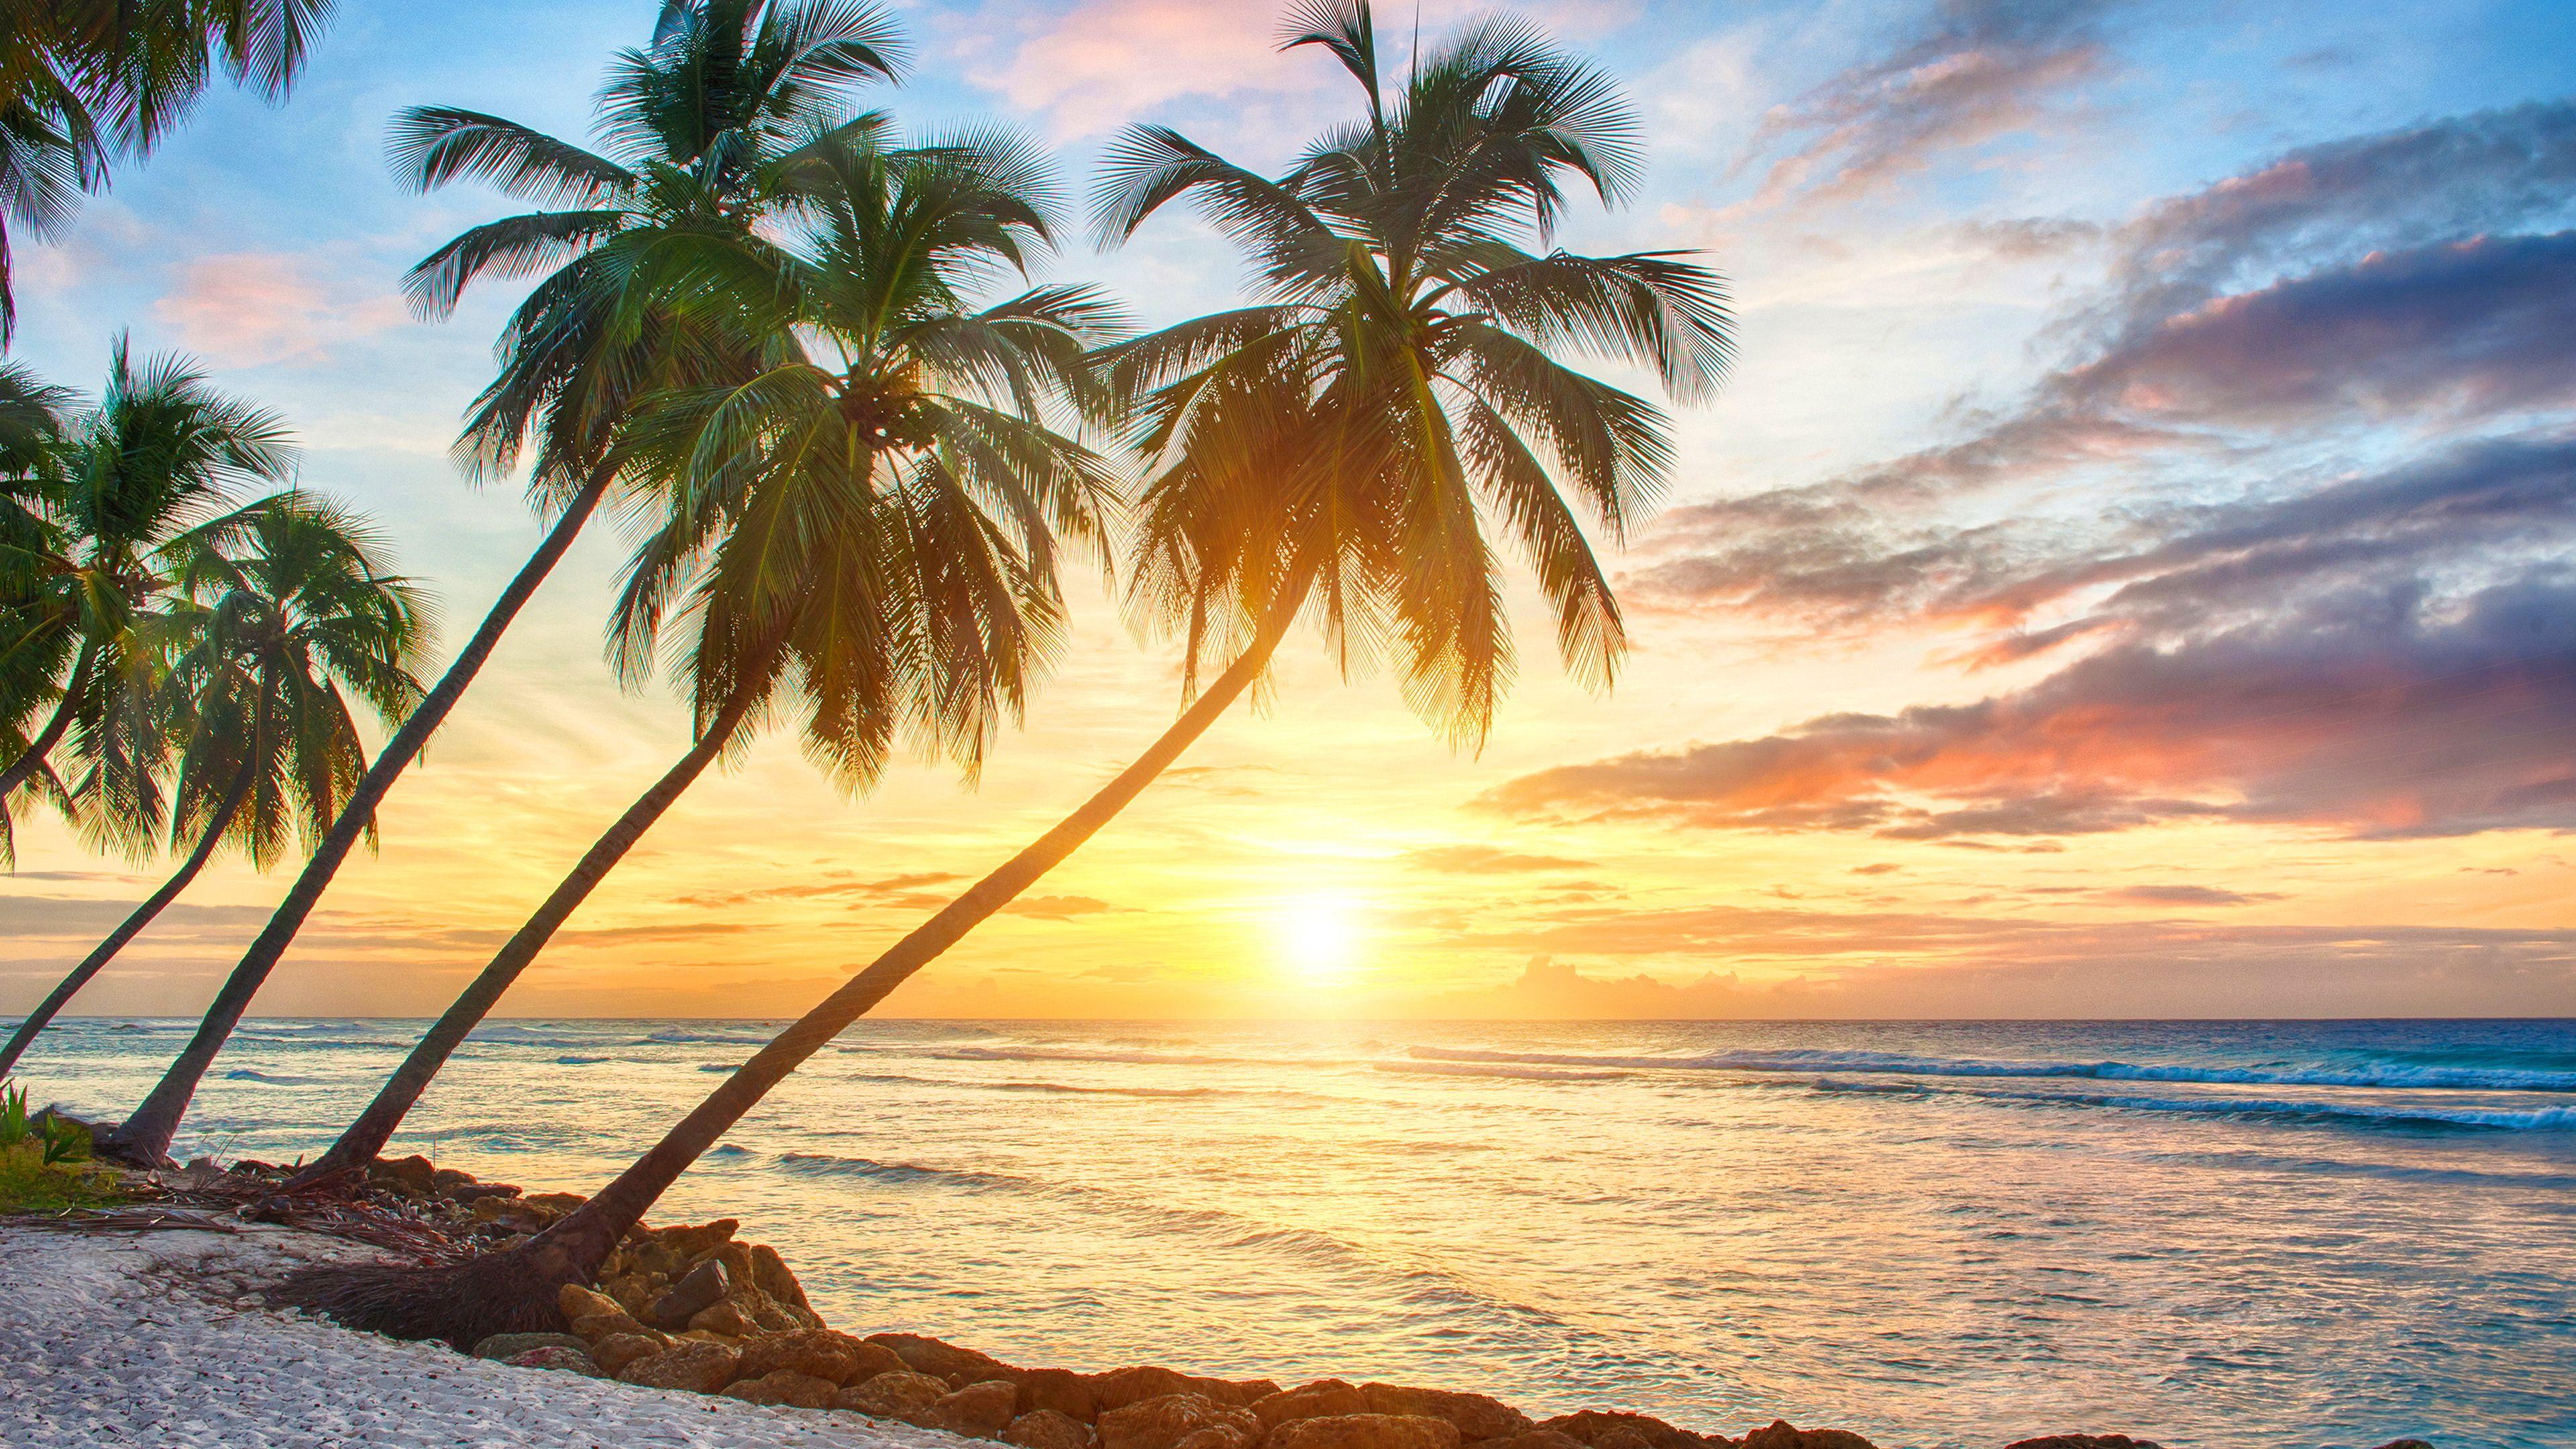 Tropical Sunrise Wallpapers - Top Free Tropical Sunrise Backgrounds ...